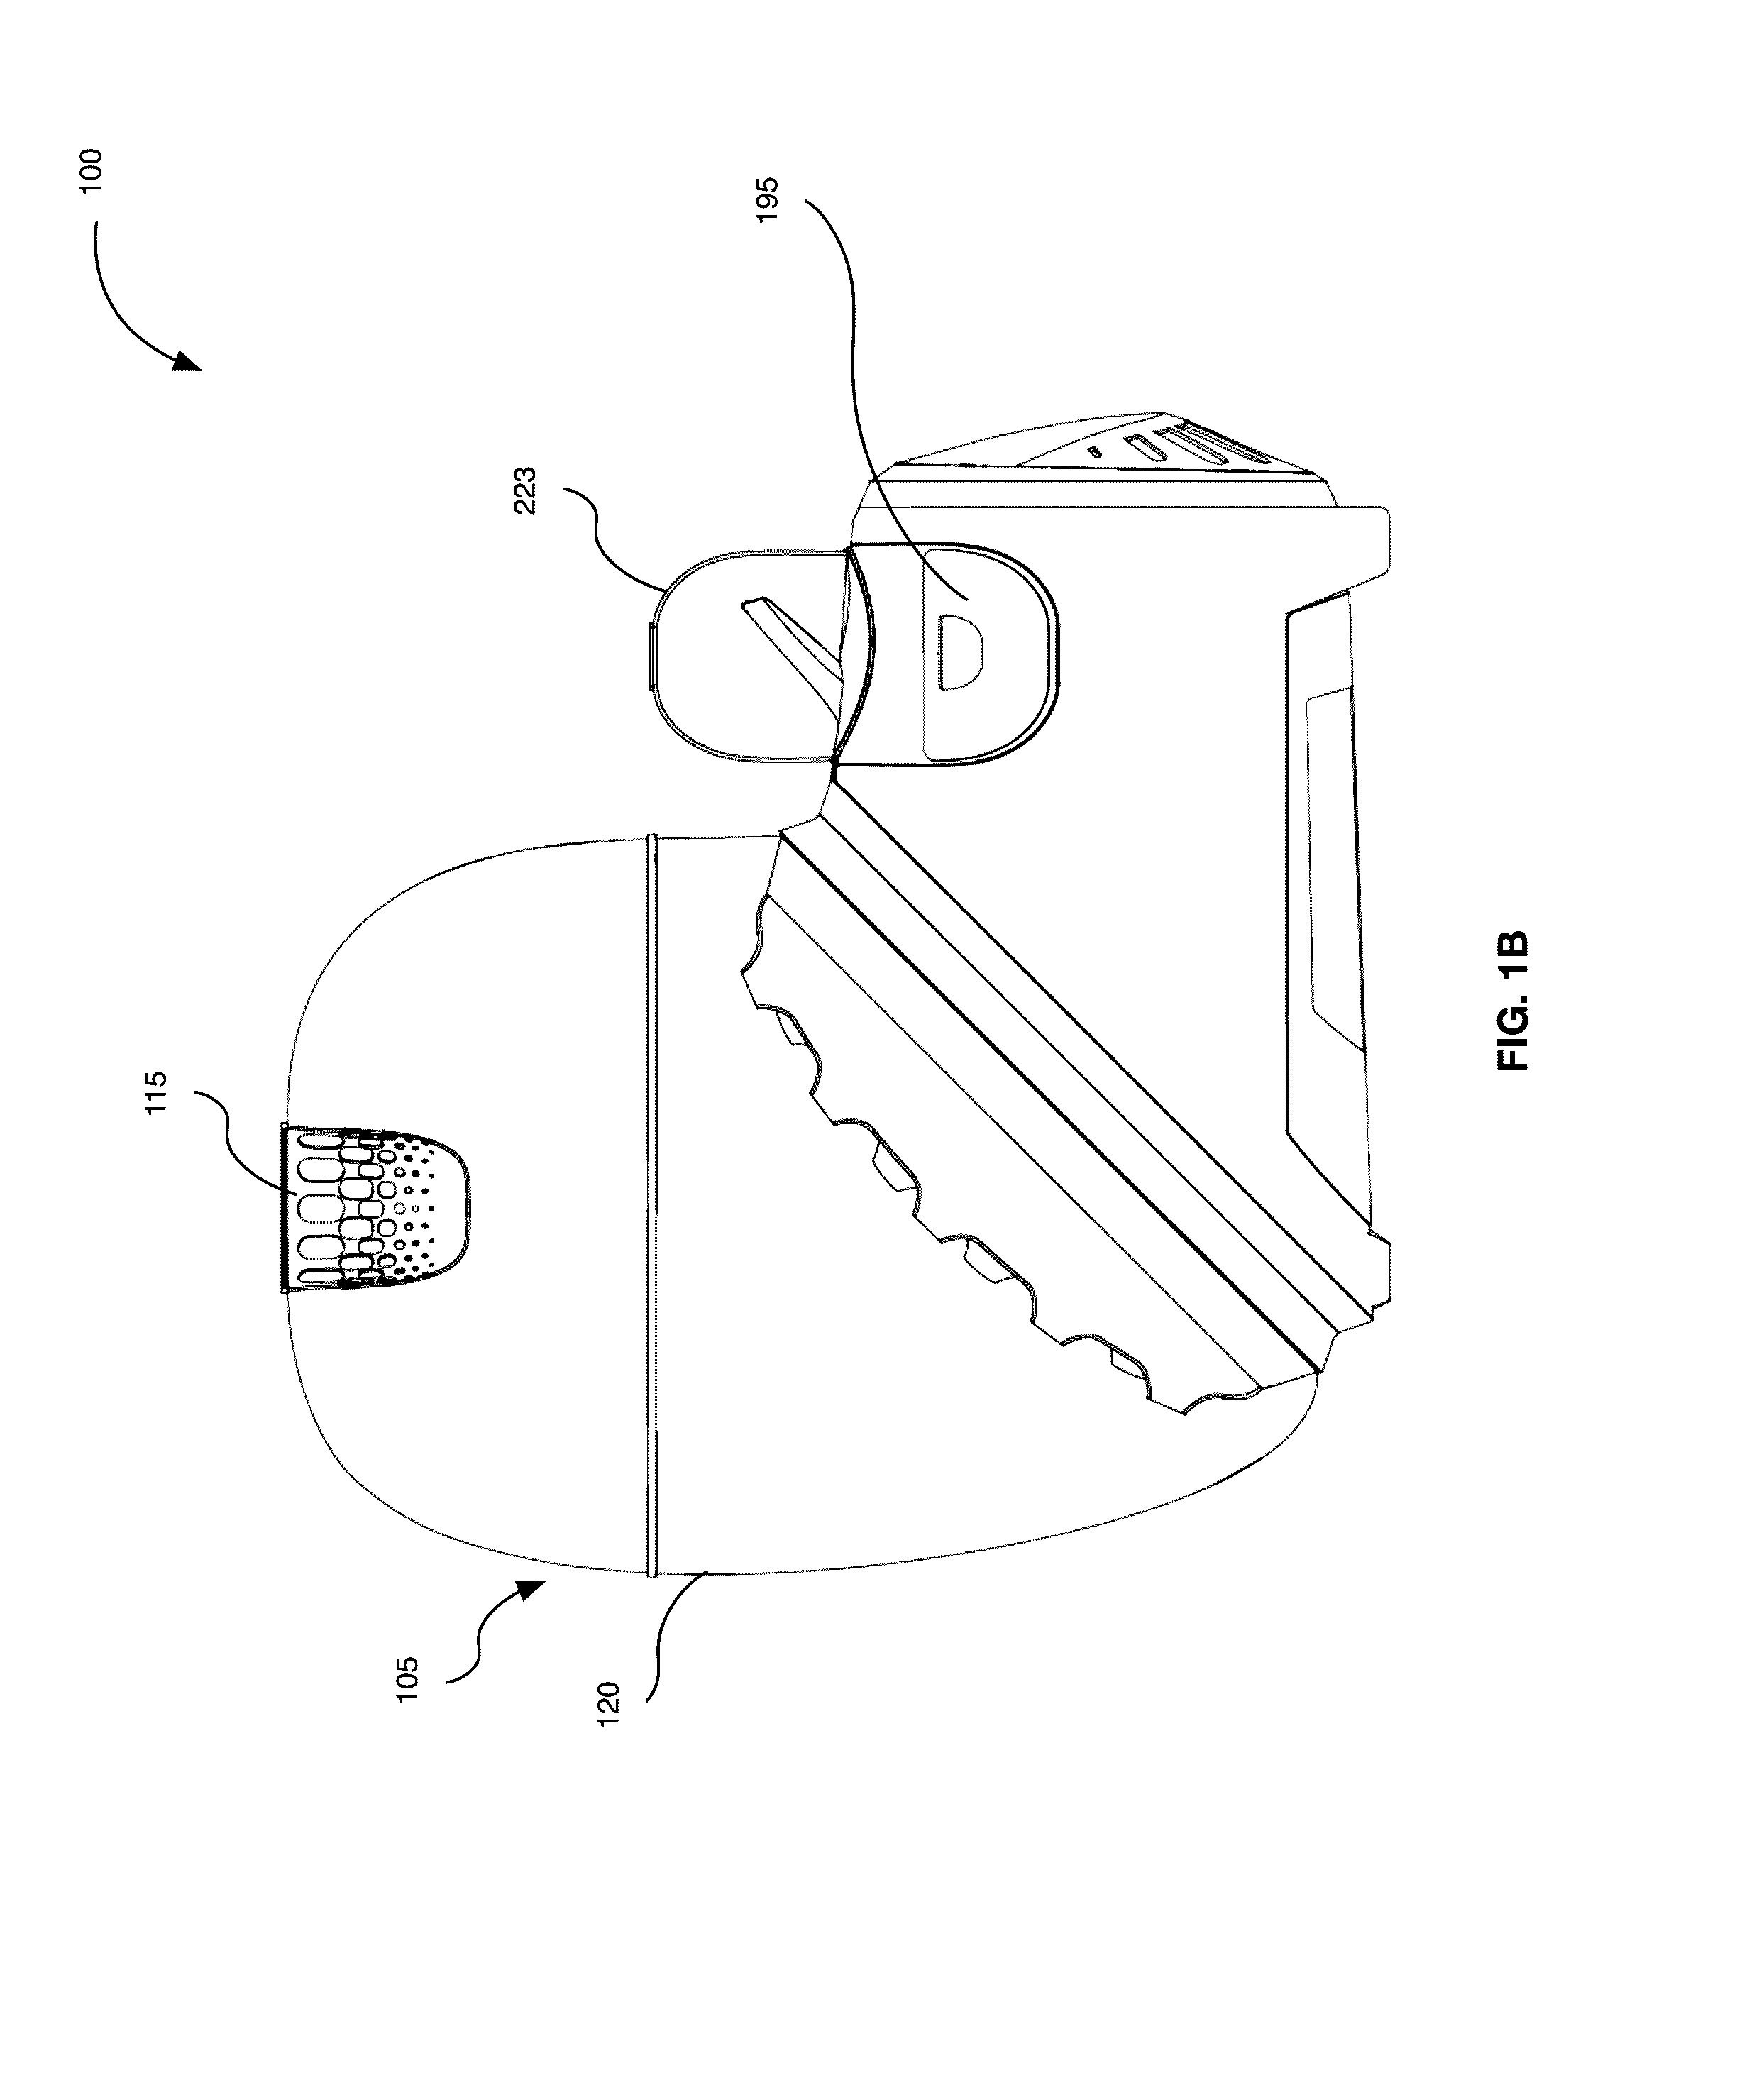 System and method for breeding and harvesting insects